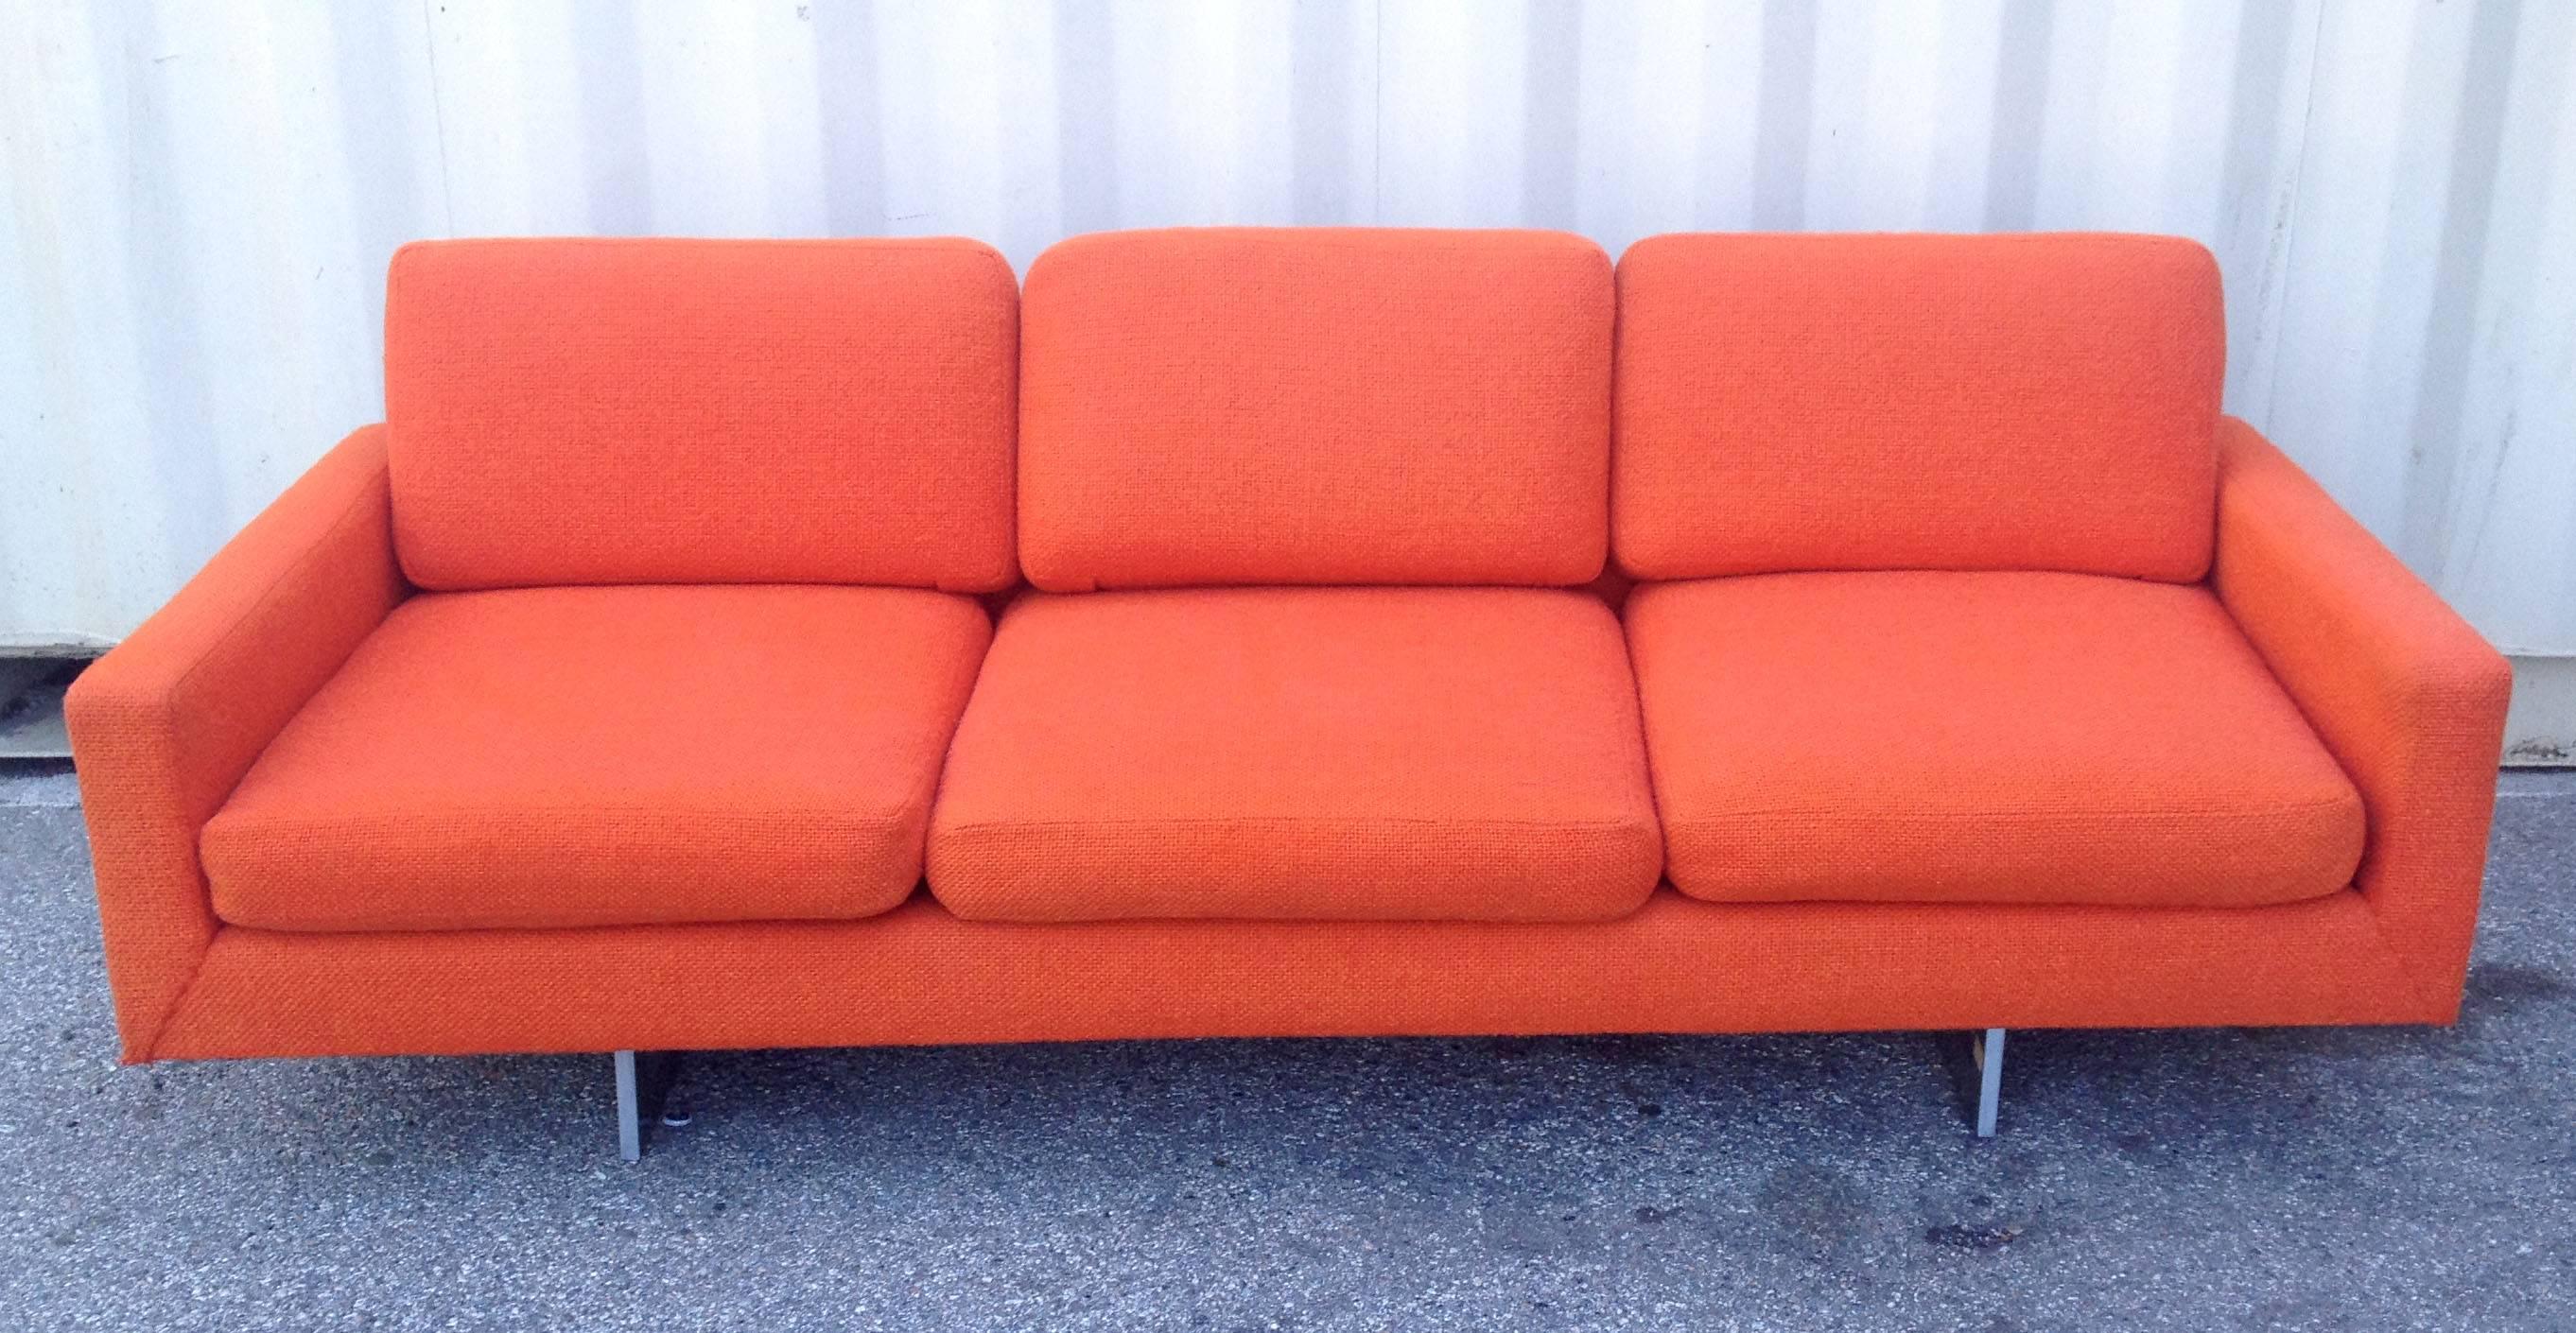 This Mid-Century Modern sofa features bright orange upholstery that is in very good original condition. The three-seat sofa sits upon two rectangular chrome bases set inside which gives it a floating look.
This design reminds the work of Milo